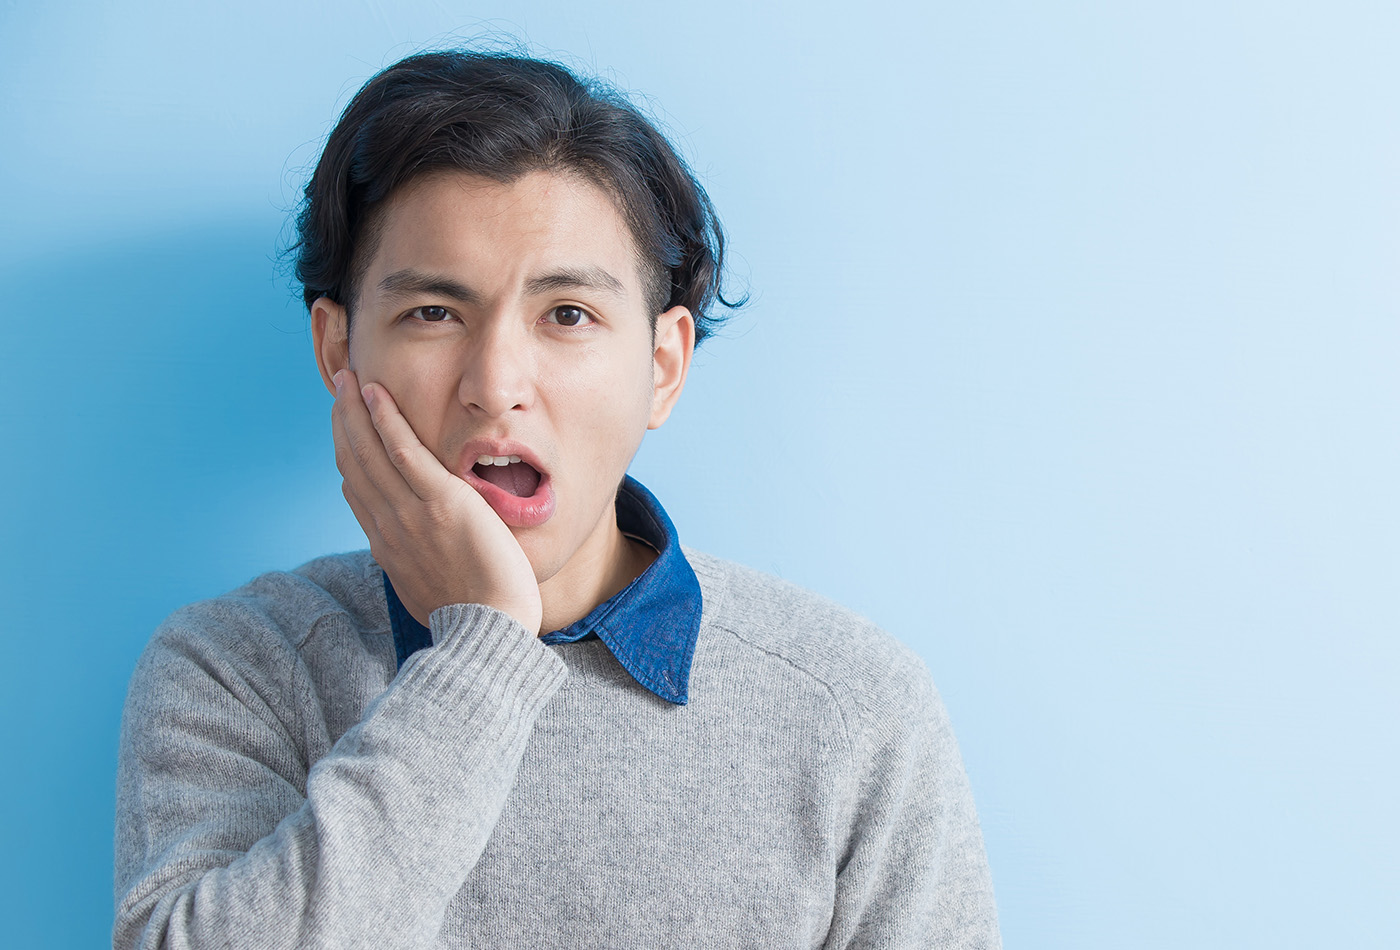 Wisdom Teeth Woes: How to Know If Wisdom Teeth Are Impacted?